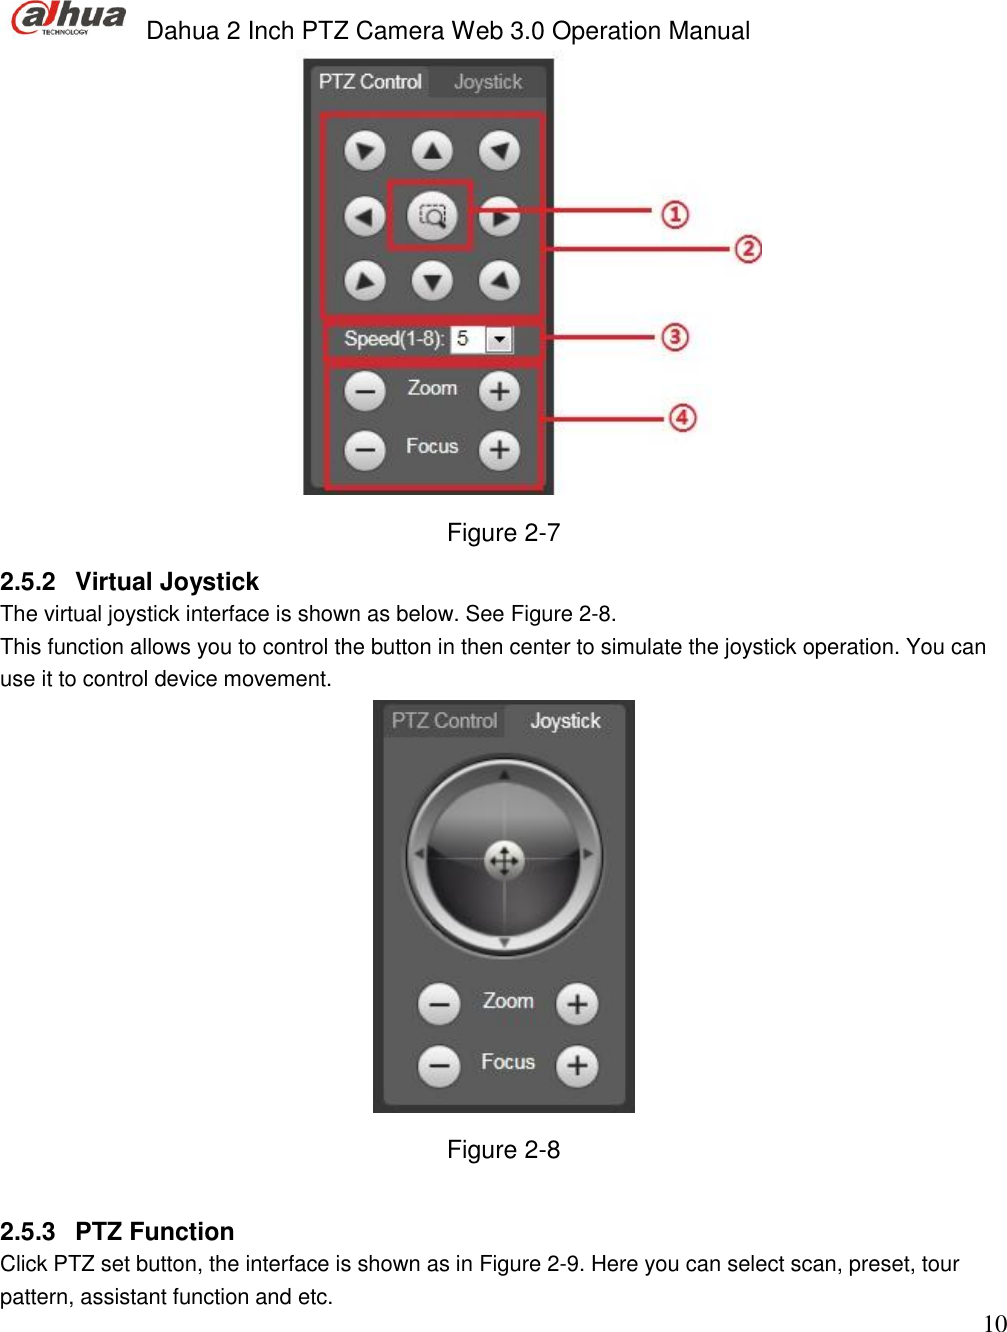  Dahua 2 Inch PTZ Camera Web 3.0 Operation Manual                                                                             10  Figure 2-7 2.5.2  Virtual Joystick  The virtual joystick interface is shown as below. See Figure 2-8. This function allows you to control the button in then center to simulate the joystick operation. You can use it to control device movement.   Figure 2-8  2.5.3  PTZ Function  Click PTZ set button, the interface is shown as in Figure 2-9. Here you can select scan, preset, tour pattern, assistant function and etc.  